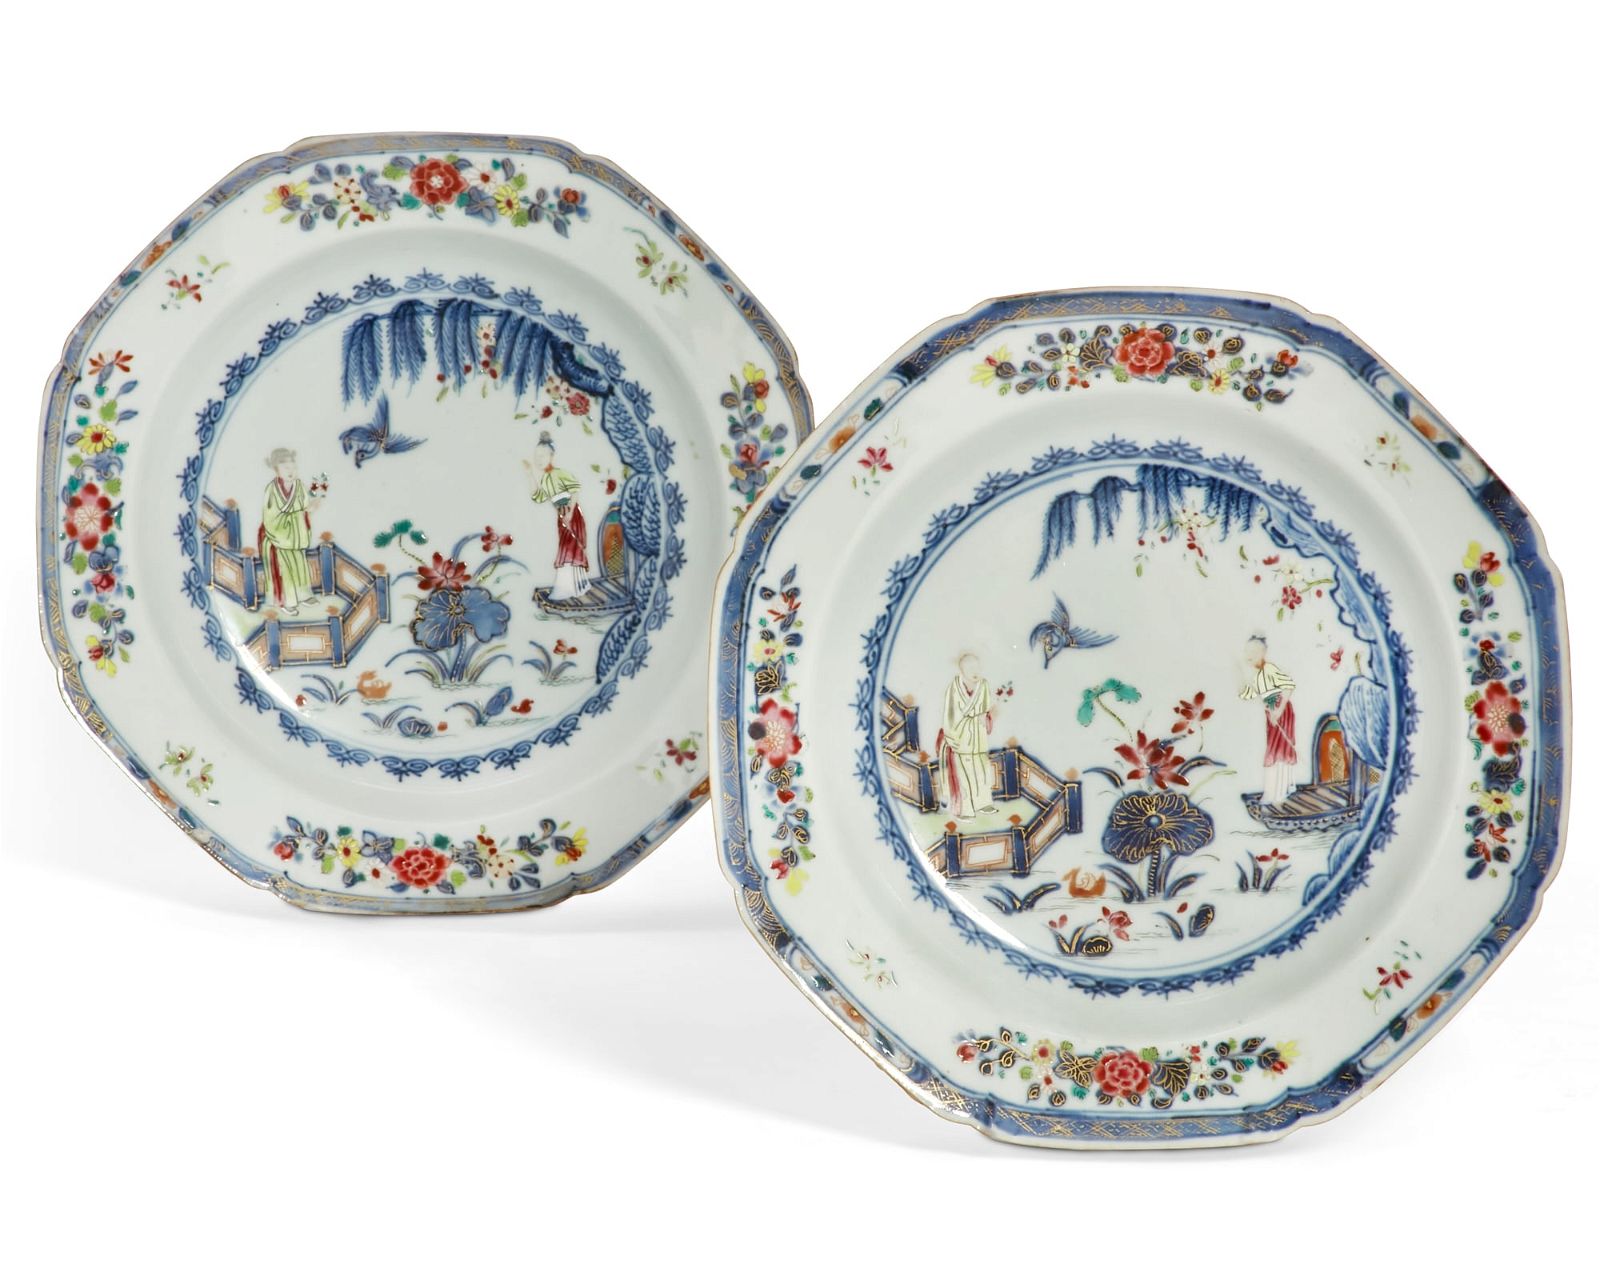 A PAIR OF CHINESE EXPORT PORCELAIN